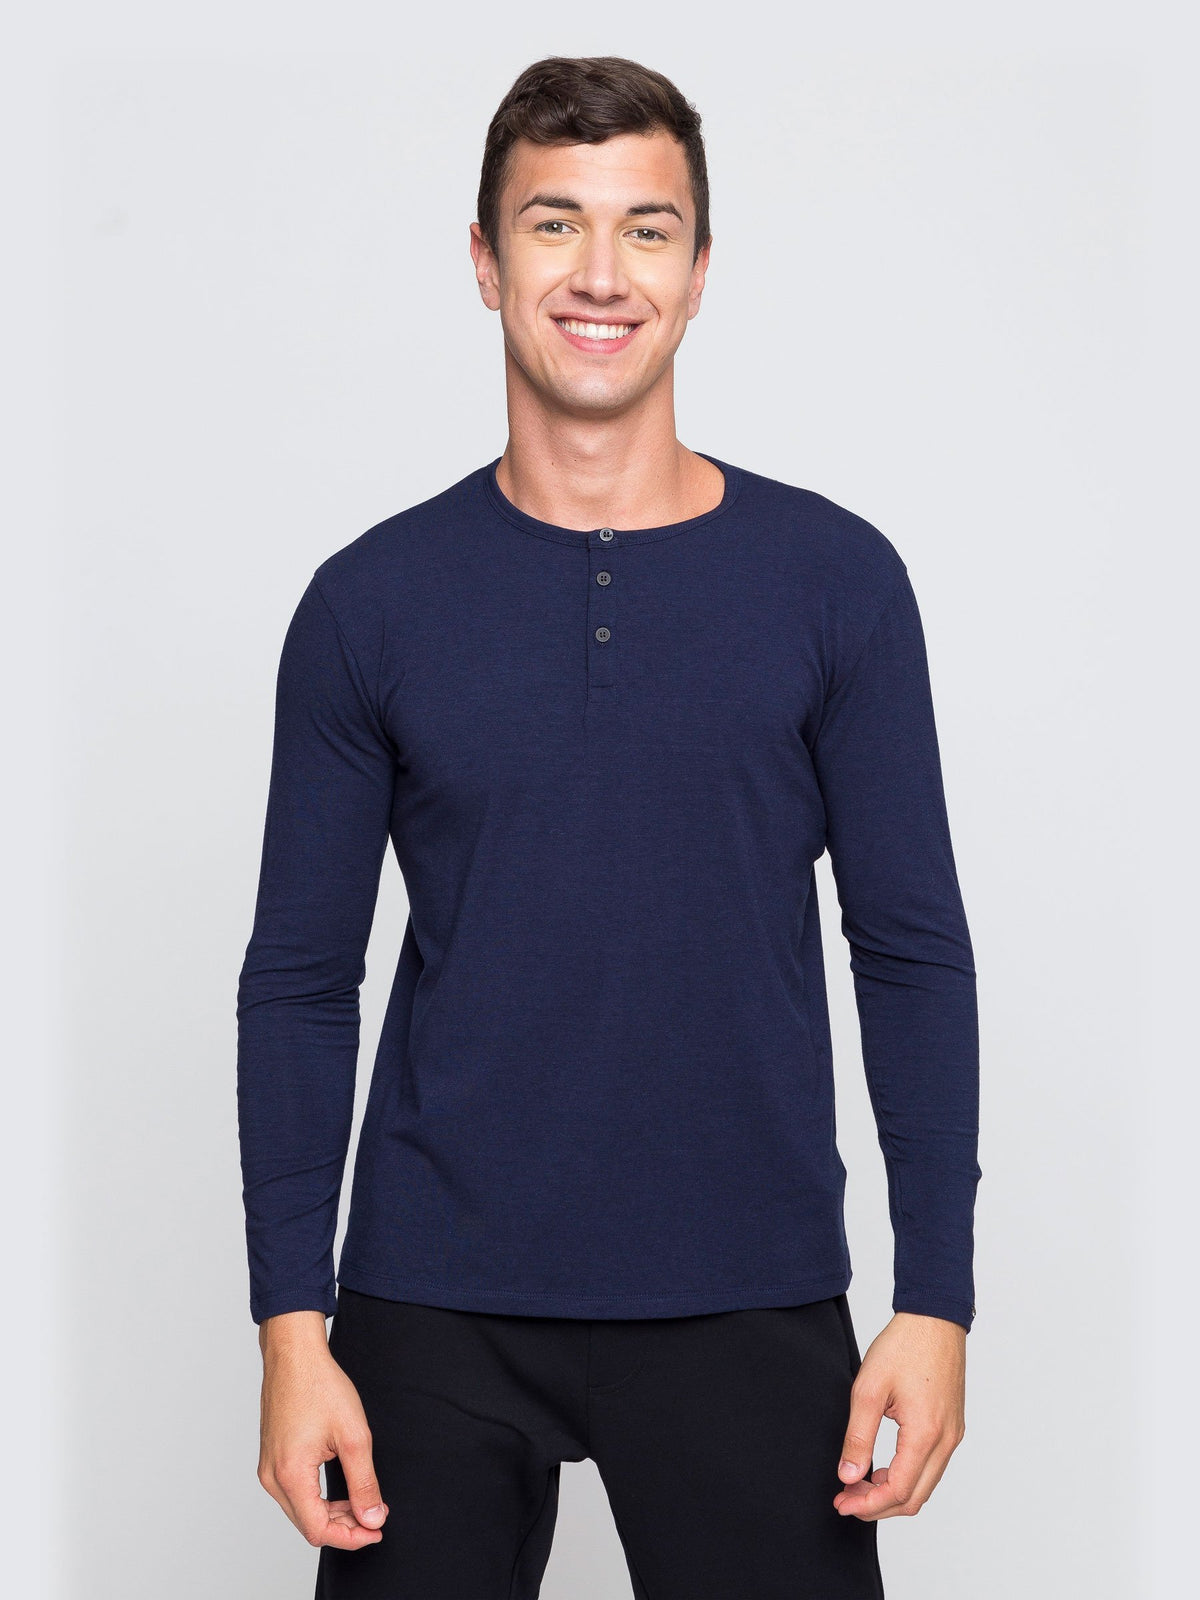 Two Blind Brothers - Mens Men's Long Sleeve Henley Navy